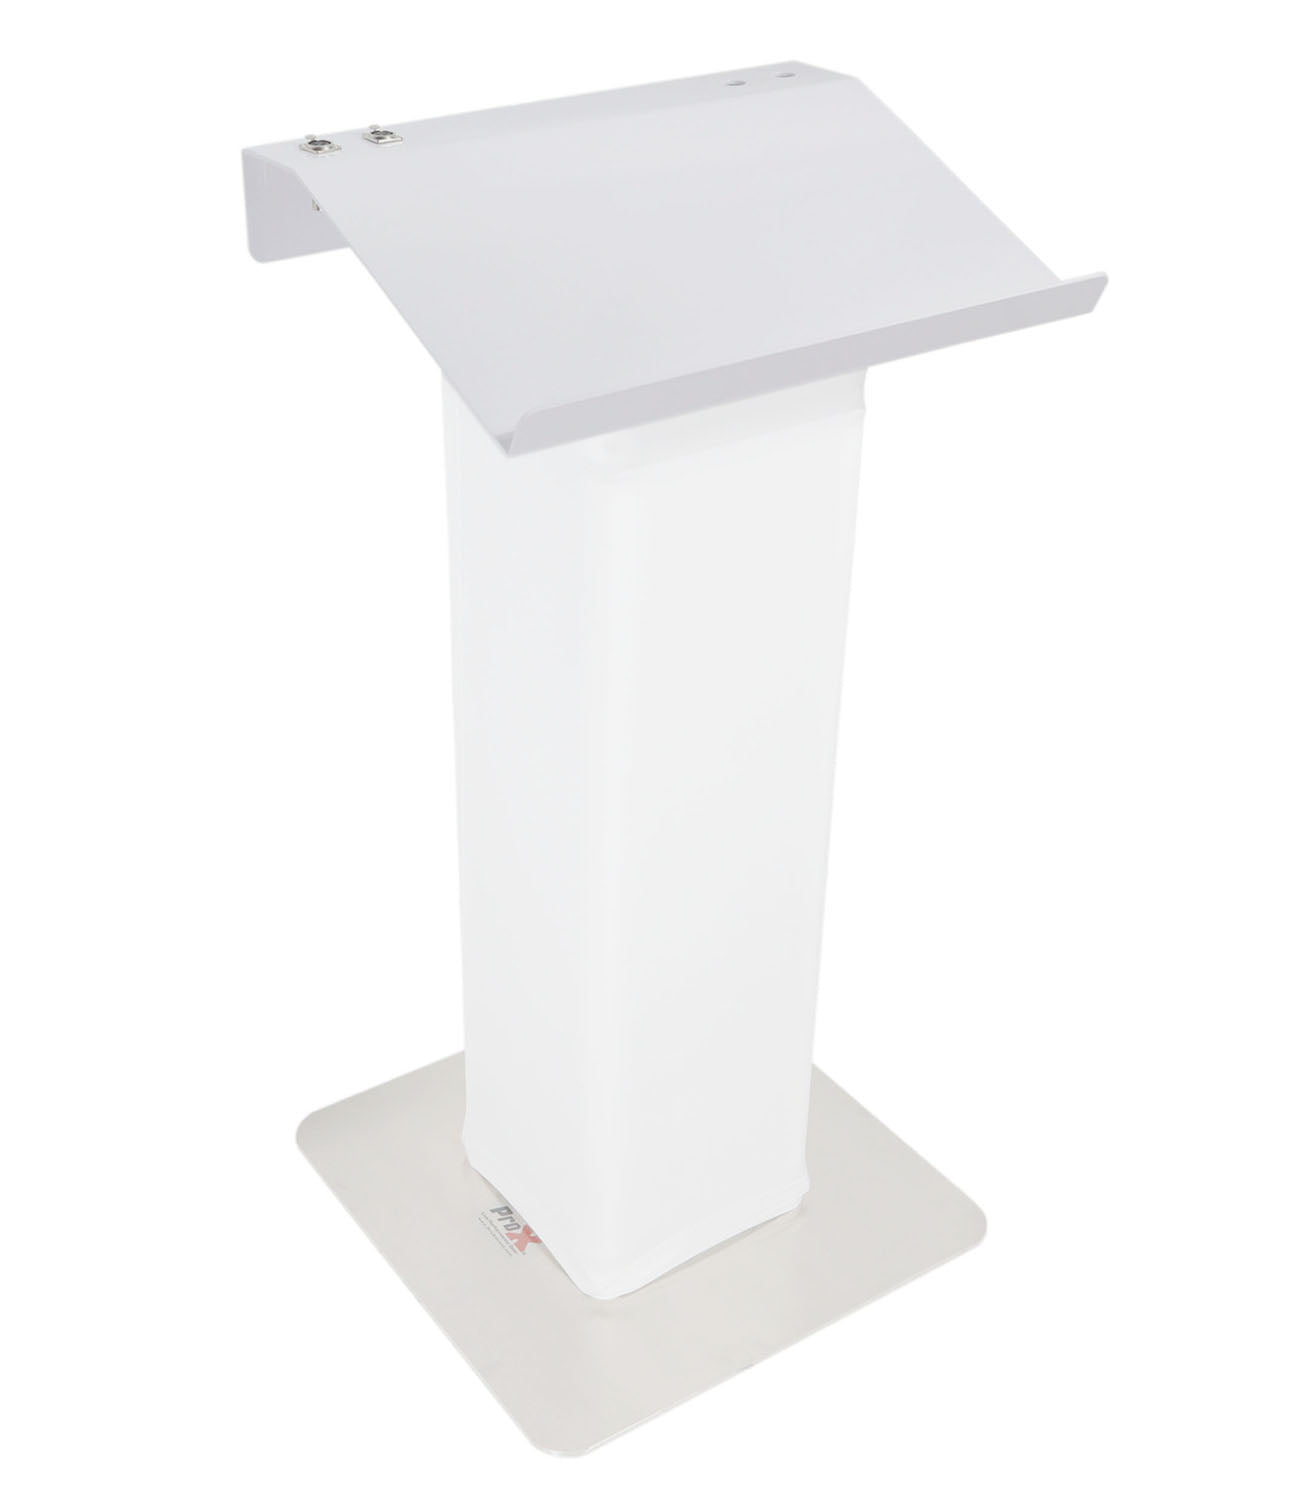 ProX XT-LECTERN24 WH, 24" Truss Lectern for D-Series Connectors with 4x Punched - White Finish by ProX Cases